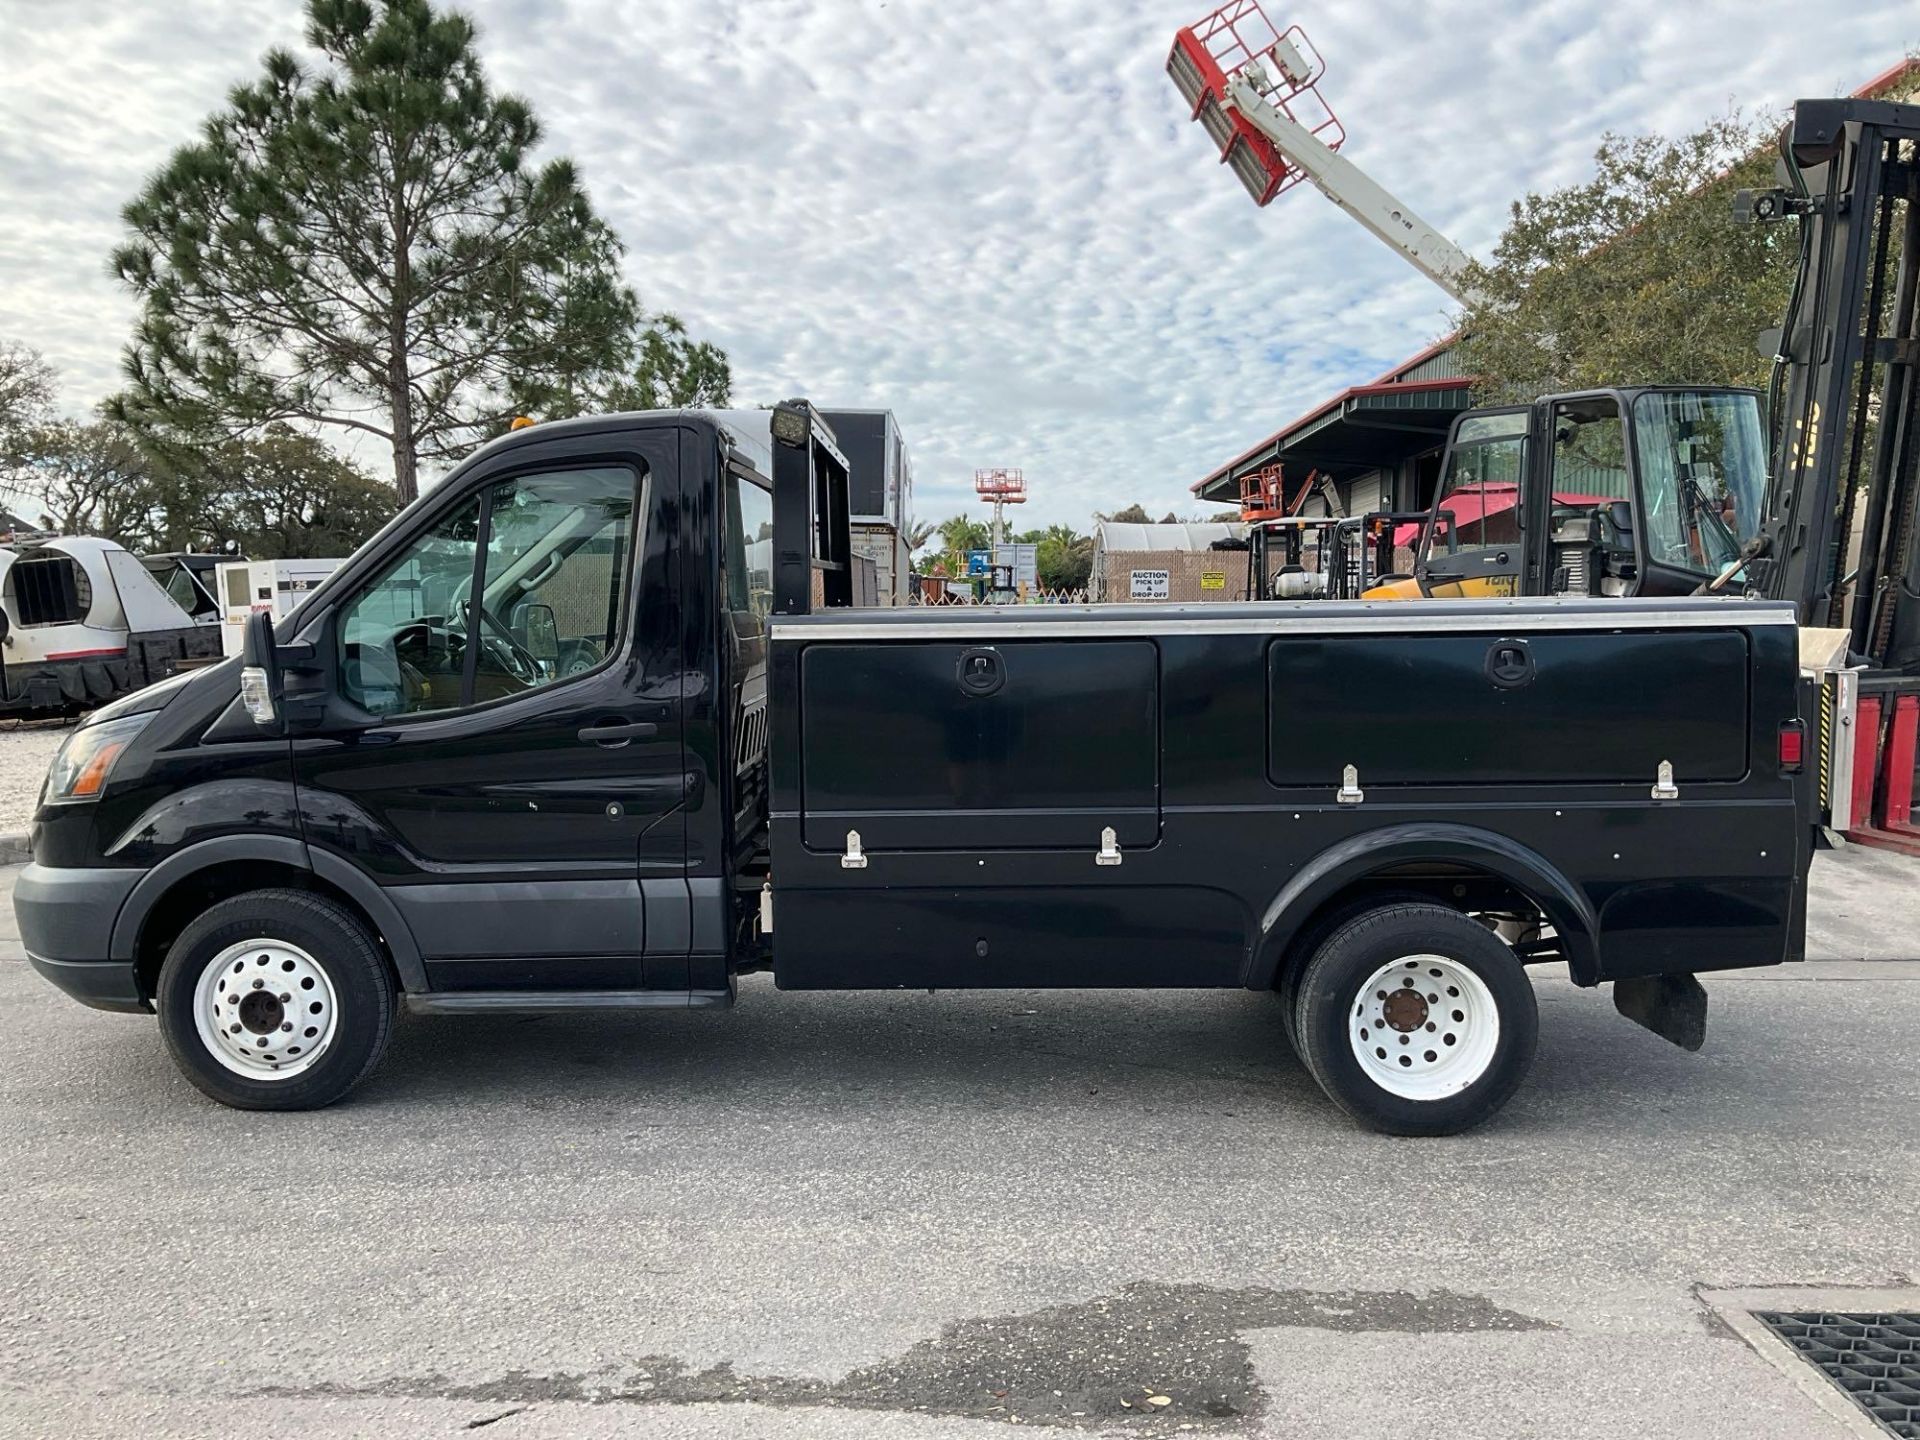 2017 FORD TRANSIT T-350 HD DRW UTILITY TRUCK , GAS POWERED AUTOMATIC, APPROX GVWR 9950LBS, STELLA... - Image 7 of 41